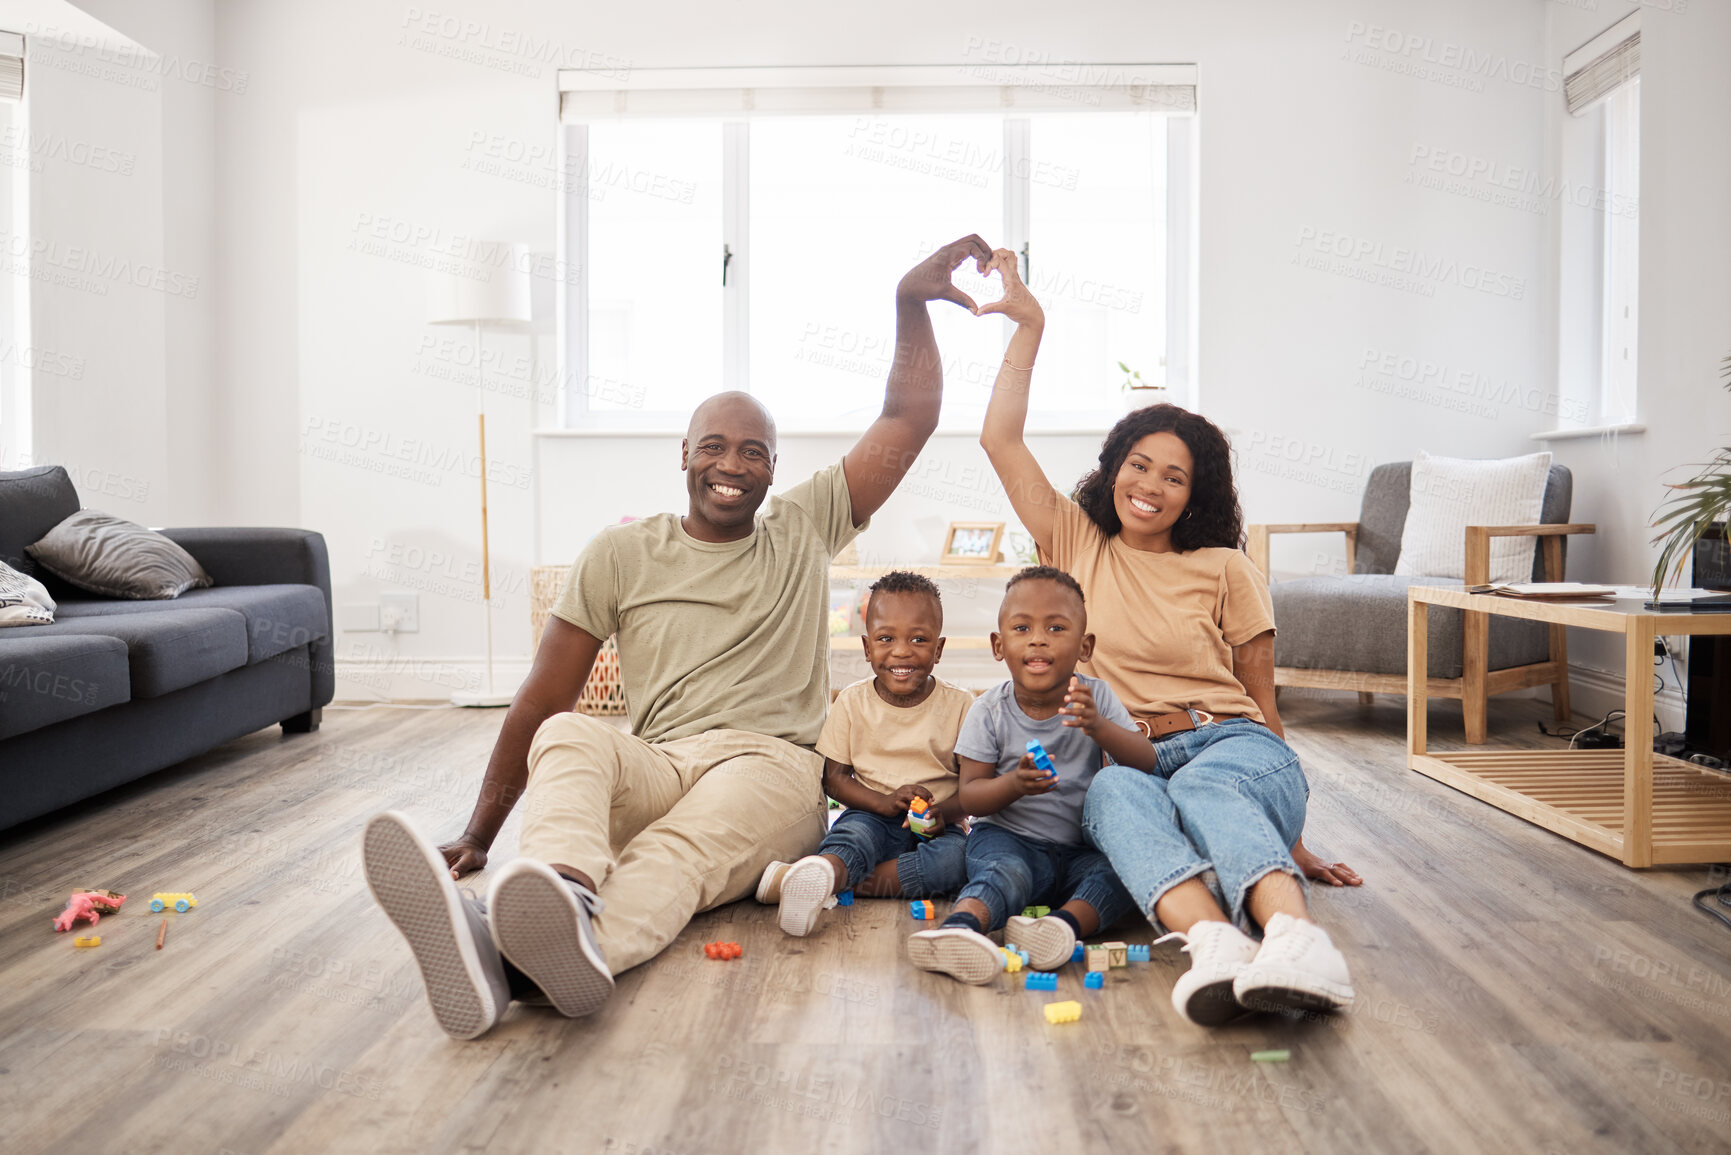 Buy stock photo Shot of a happy young family making a heart shaped gesture above themselves during play time at home